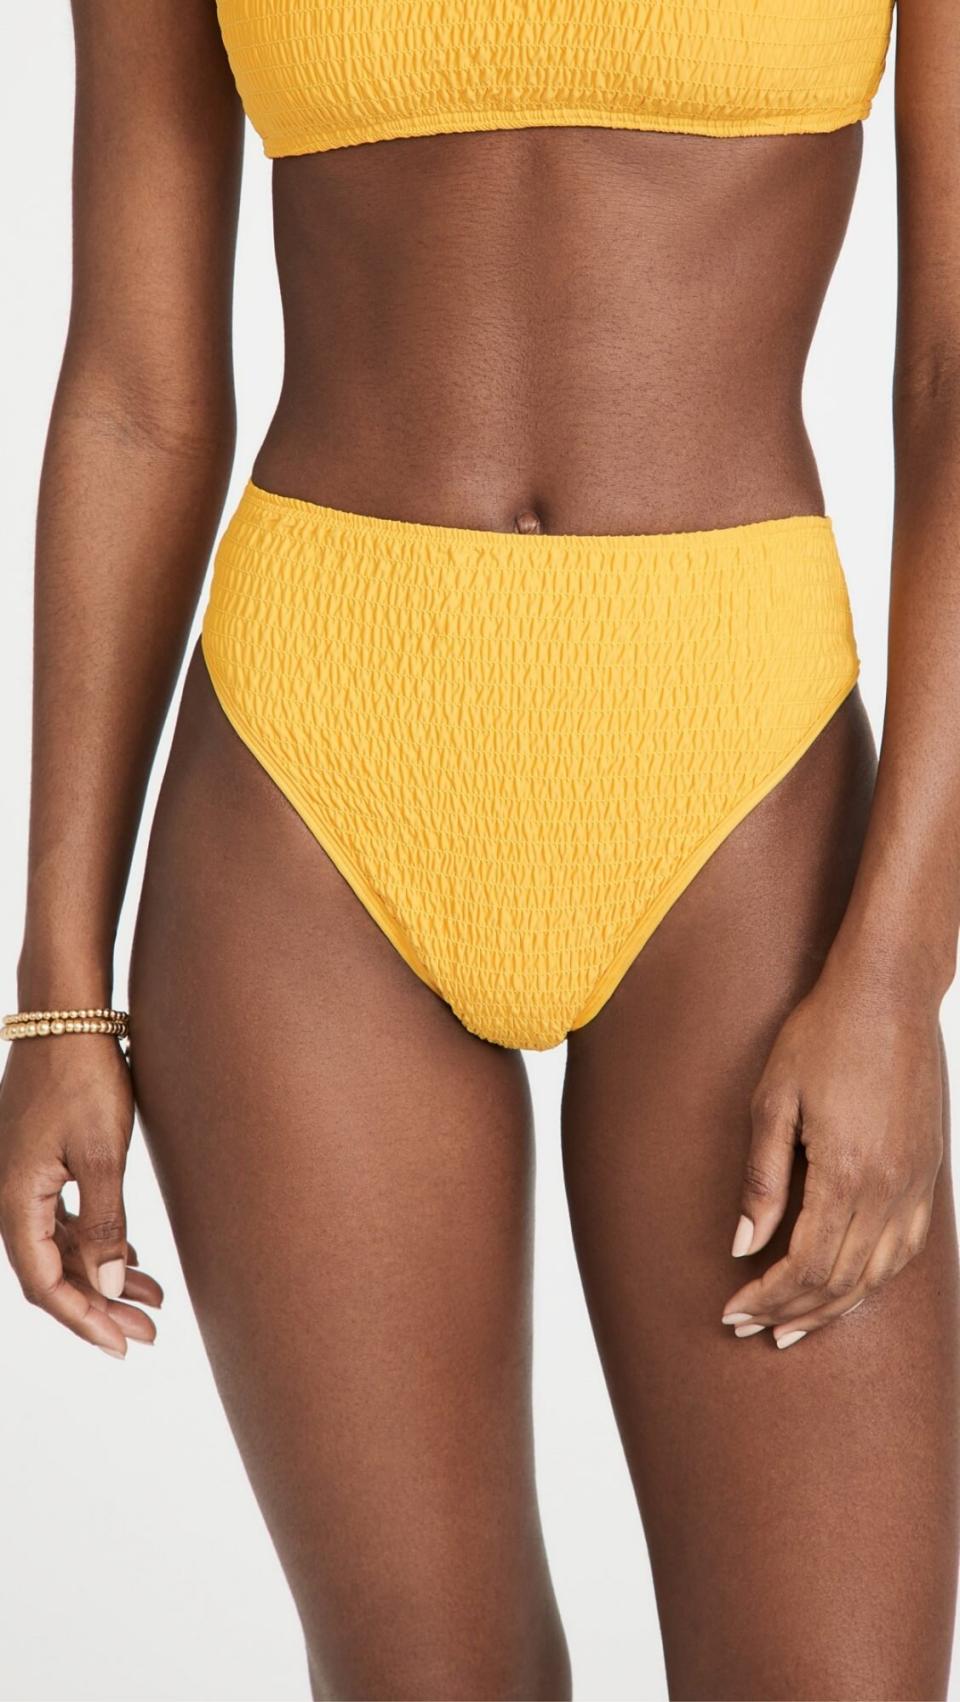 Swimsuits Are All On Sale Right Now — Here’s How to Find One That Fits Perfectly